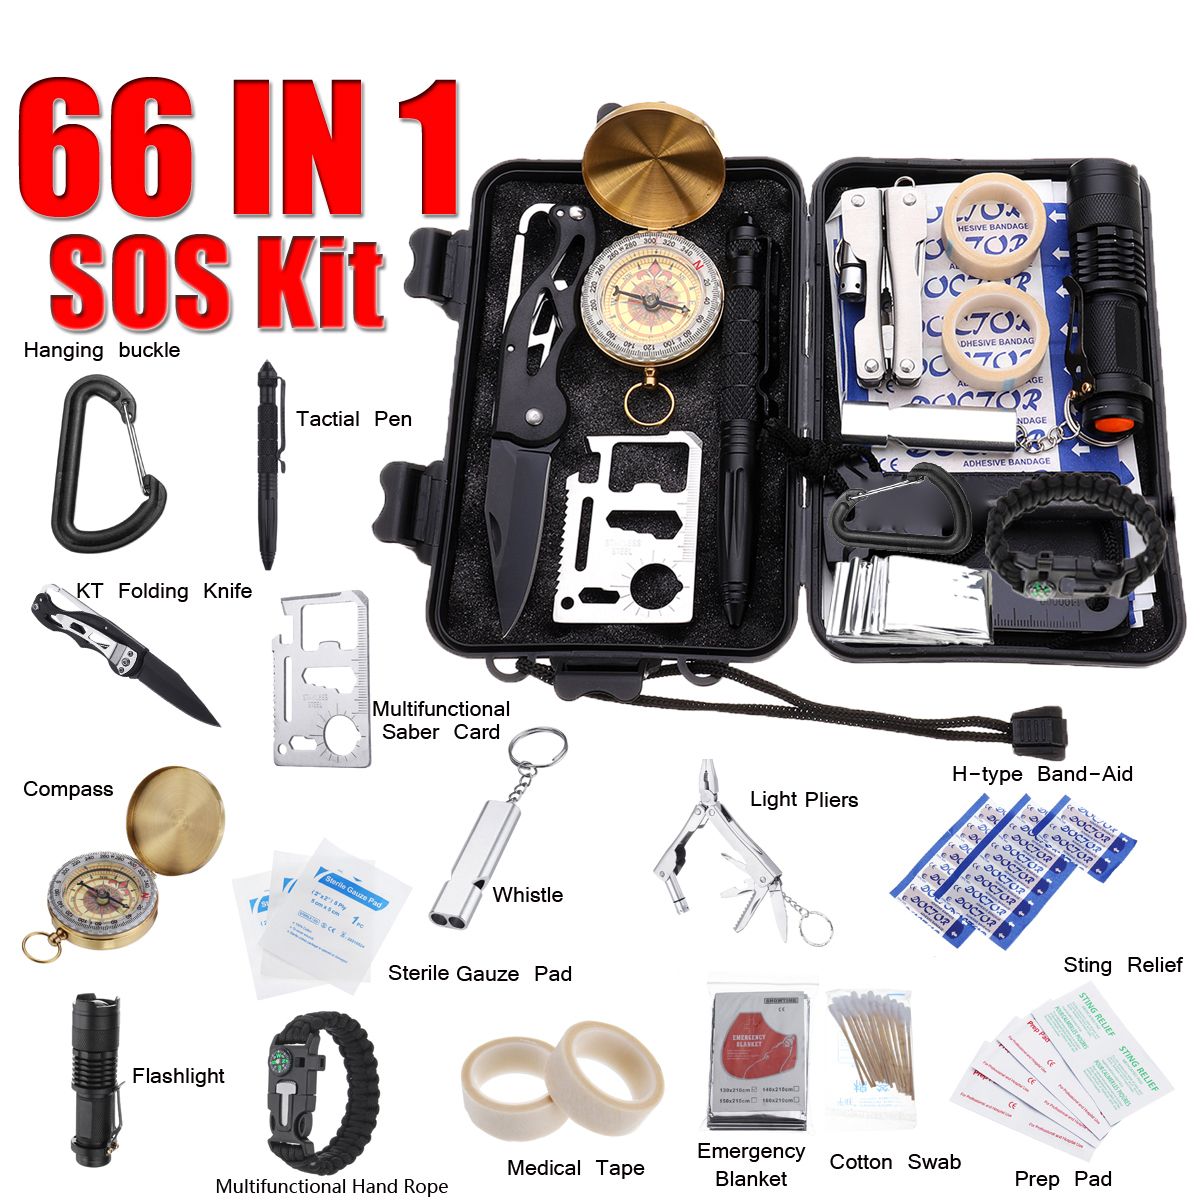 66-in-1-SOS-Kit-Outdoor-Emergency-Equipment-Box-Camping-Survival-Gear-Tools-Kit-1434689